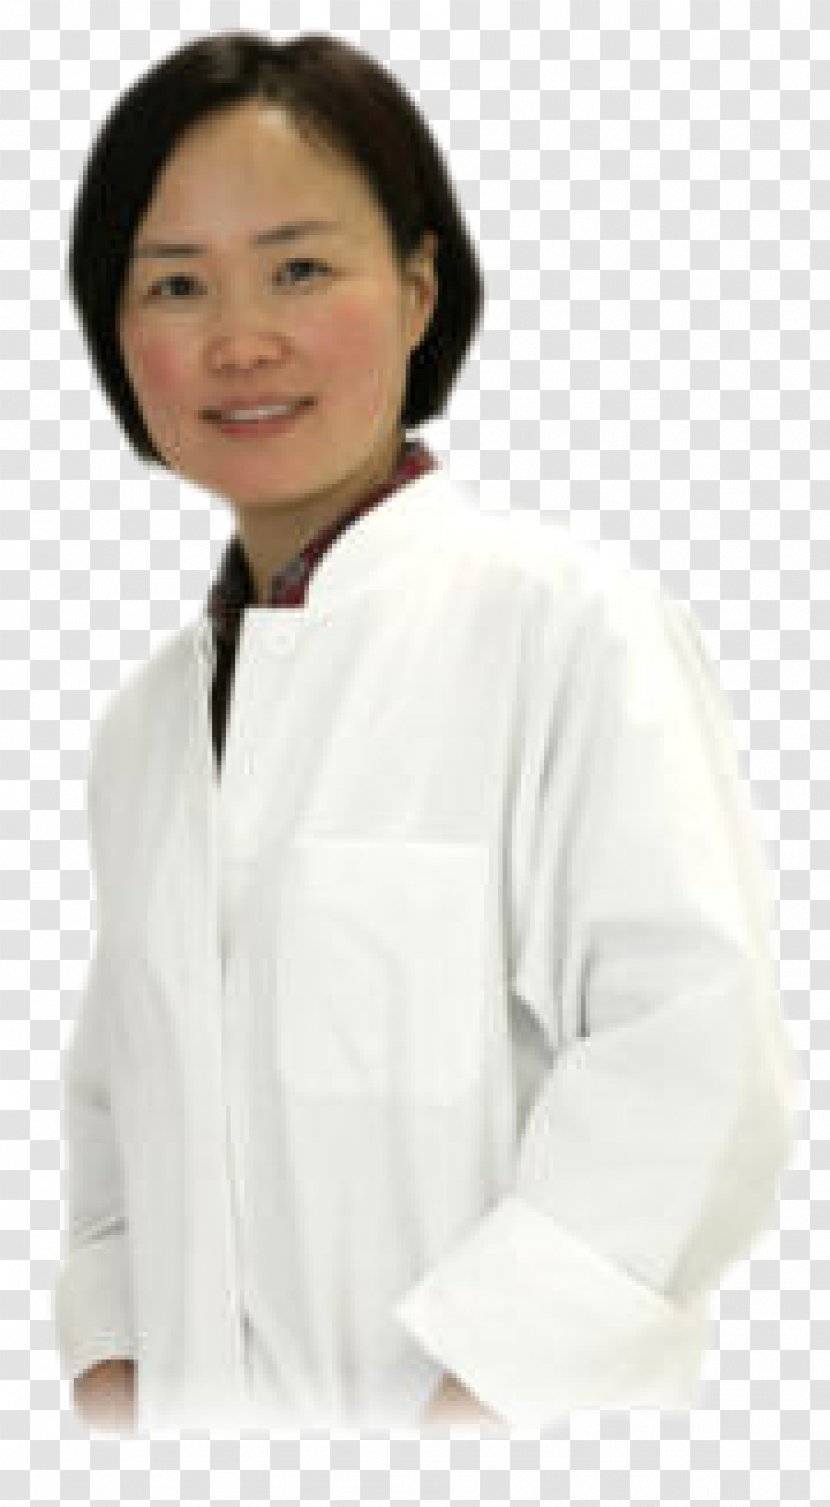 Lab Coats Physician Dress Shirt Blouse Sleeve - Tree - Traditional Chinese Medicine Transparent PNG